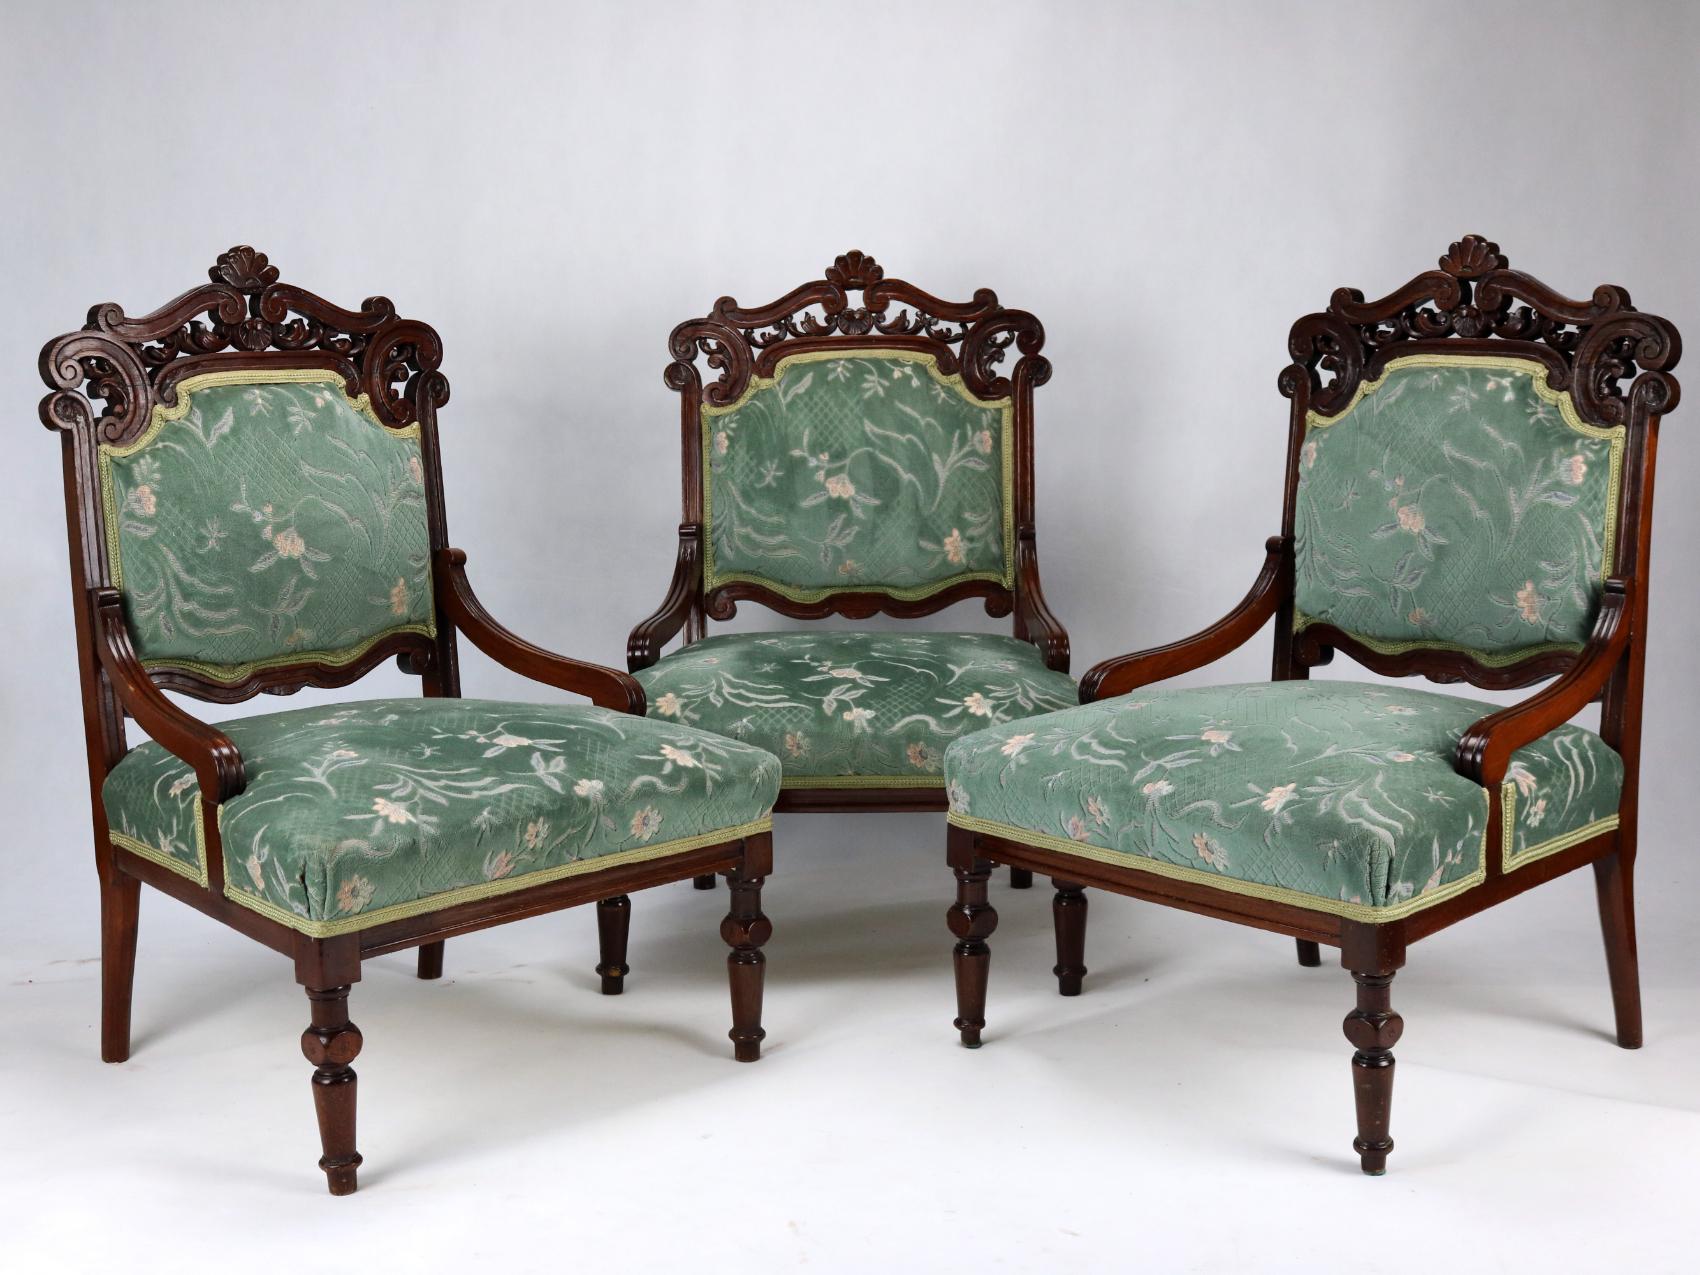 Three beech carved armchairs manufactured, circa 1880.